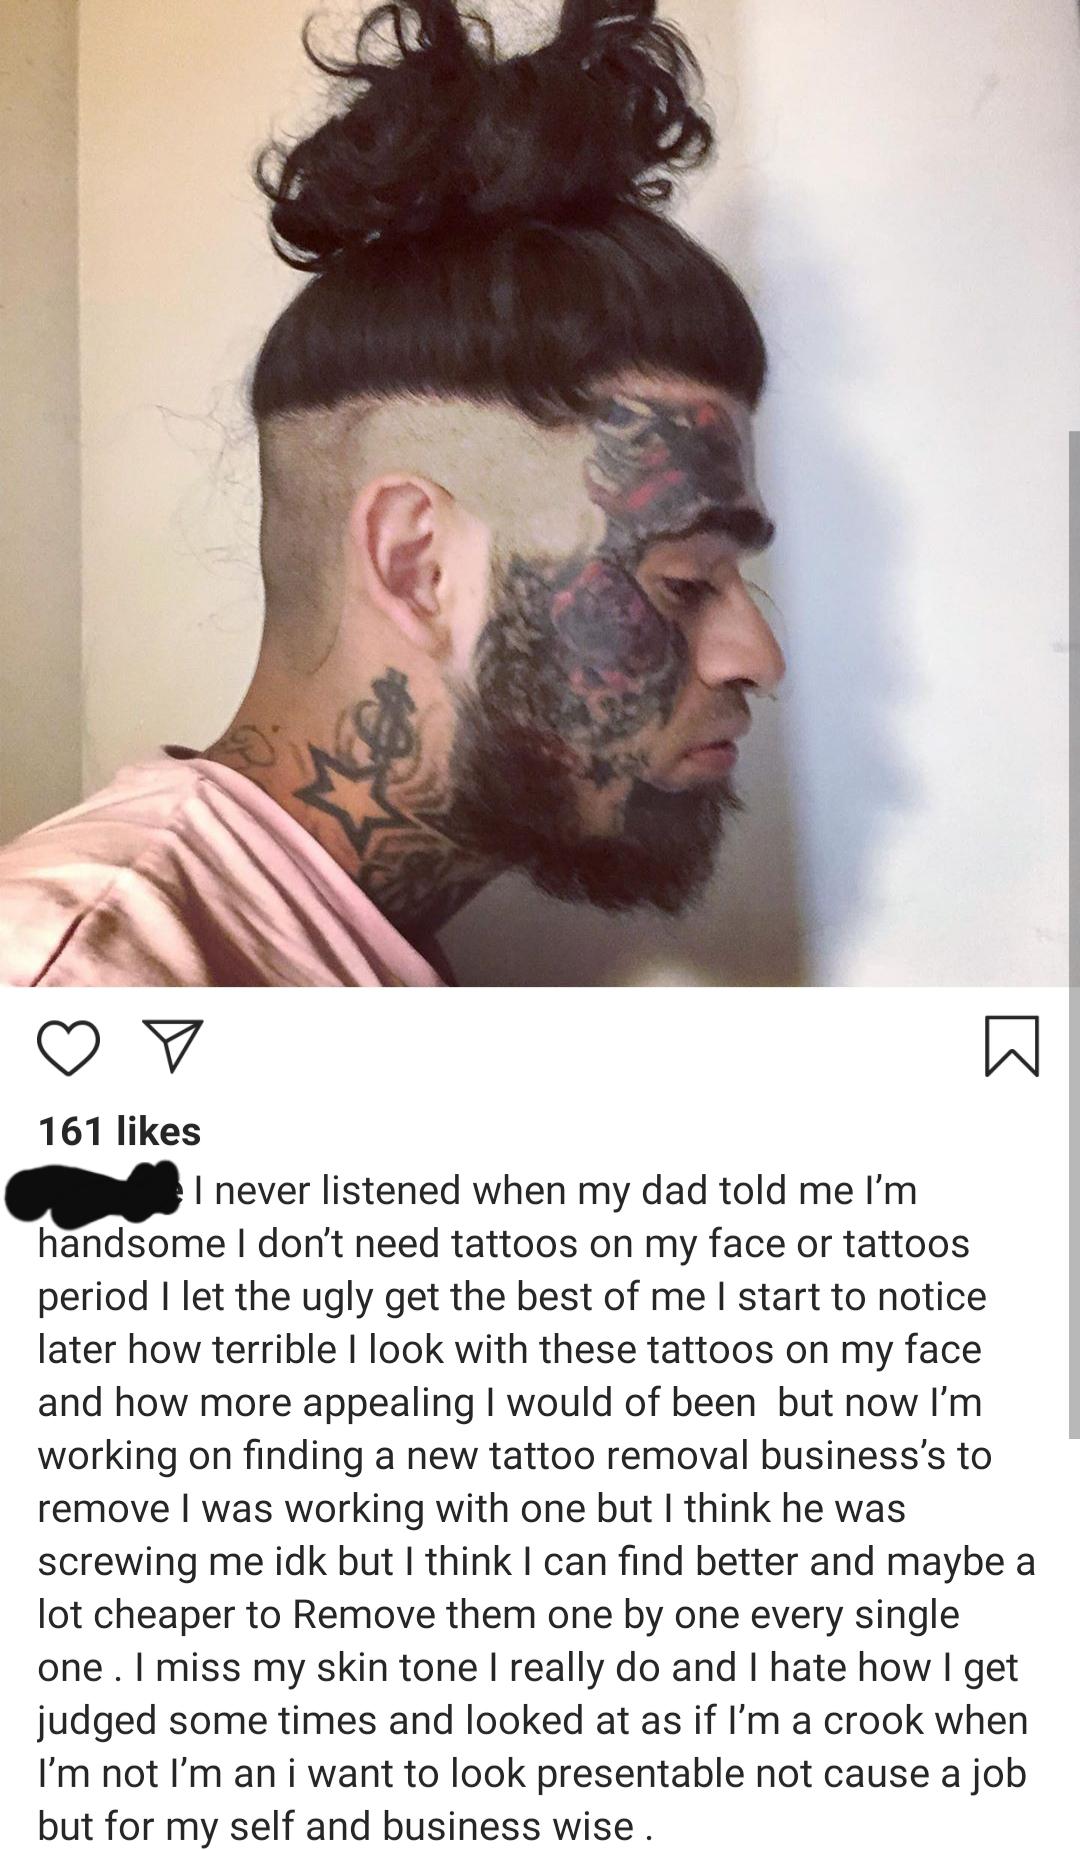 He regrets his face tattoos.